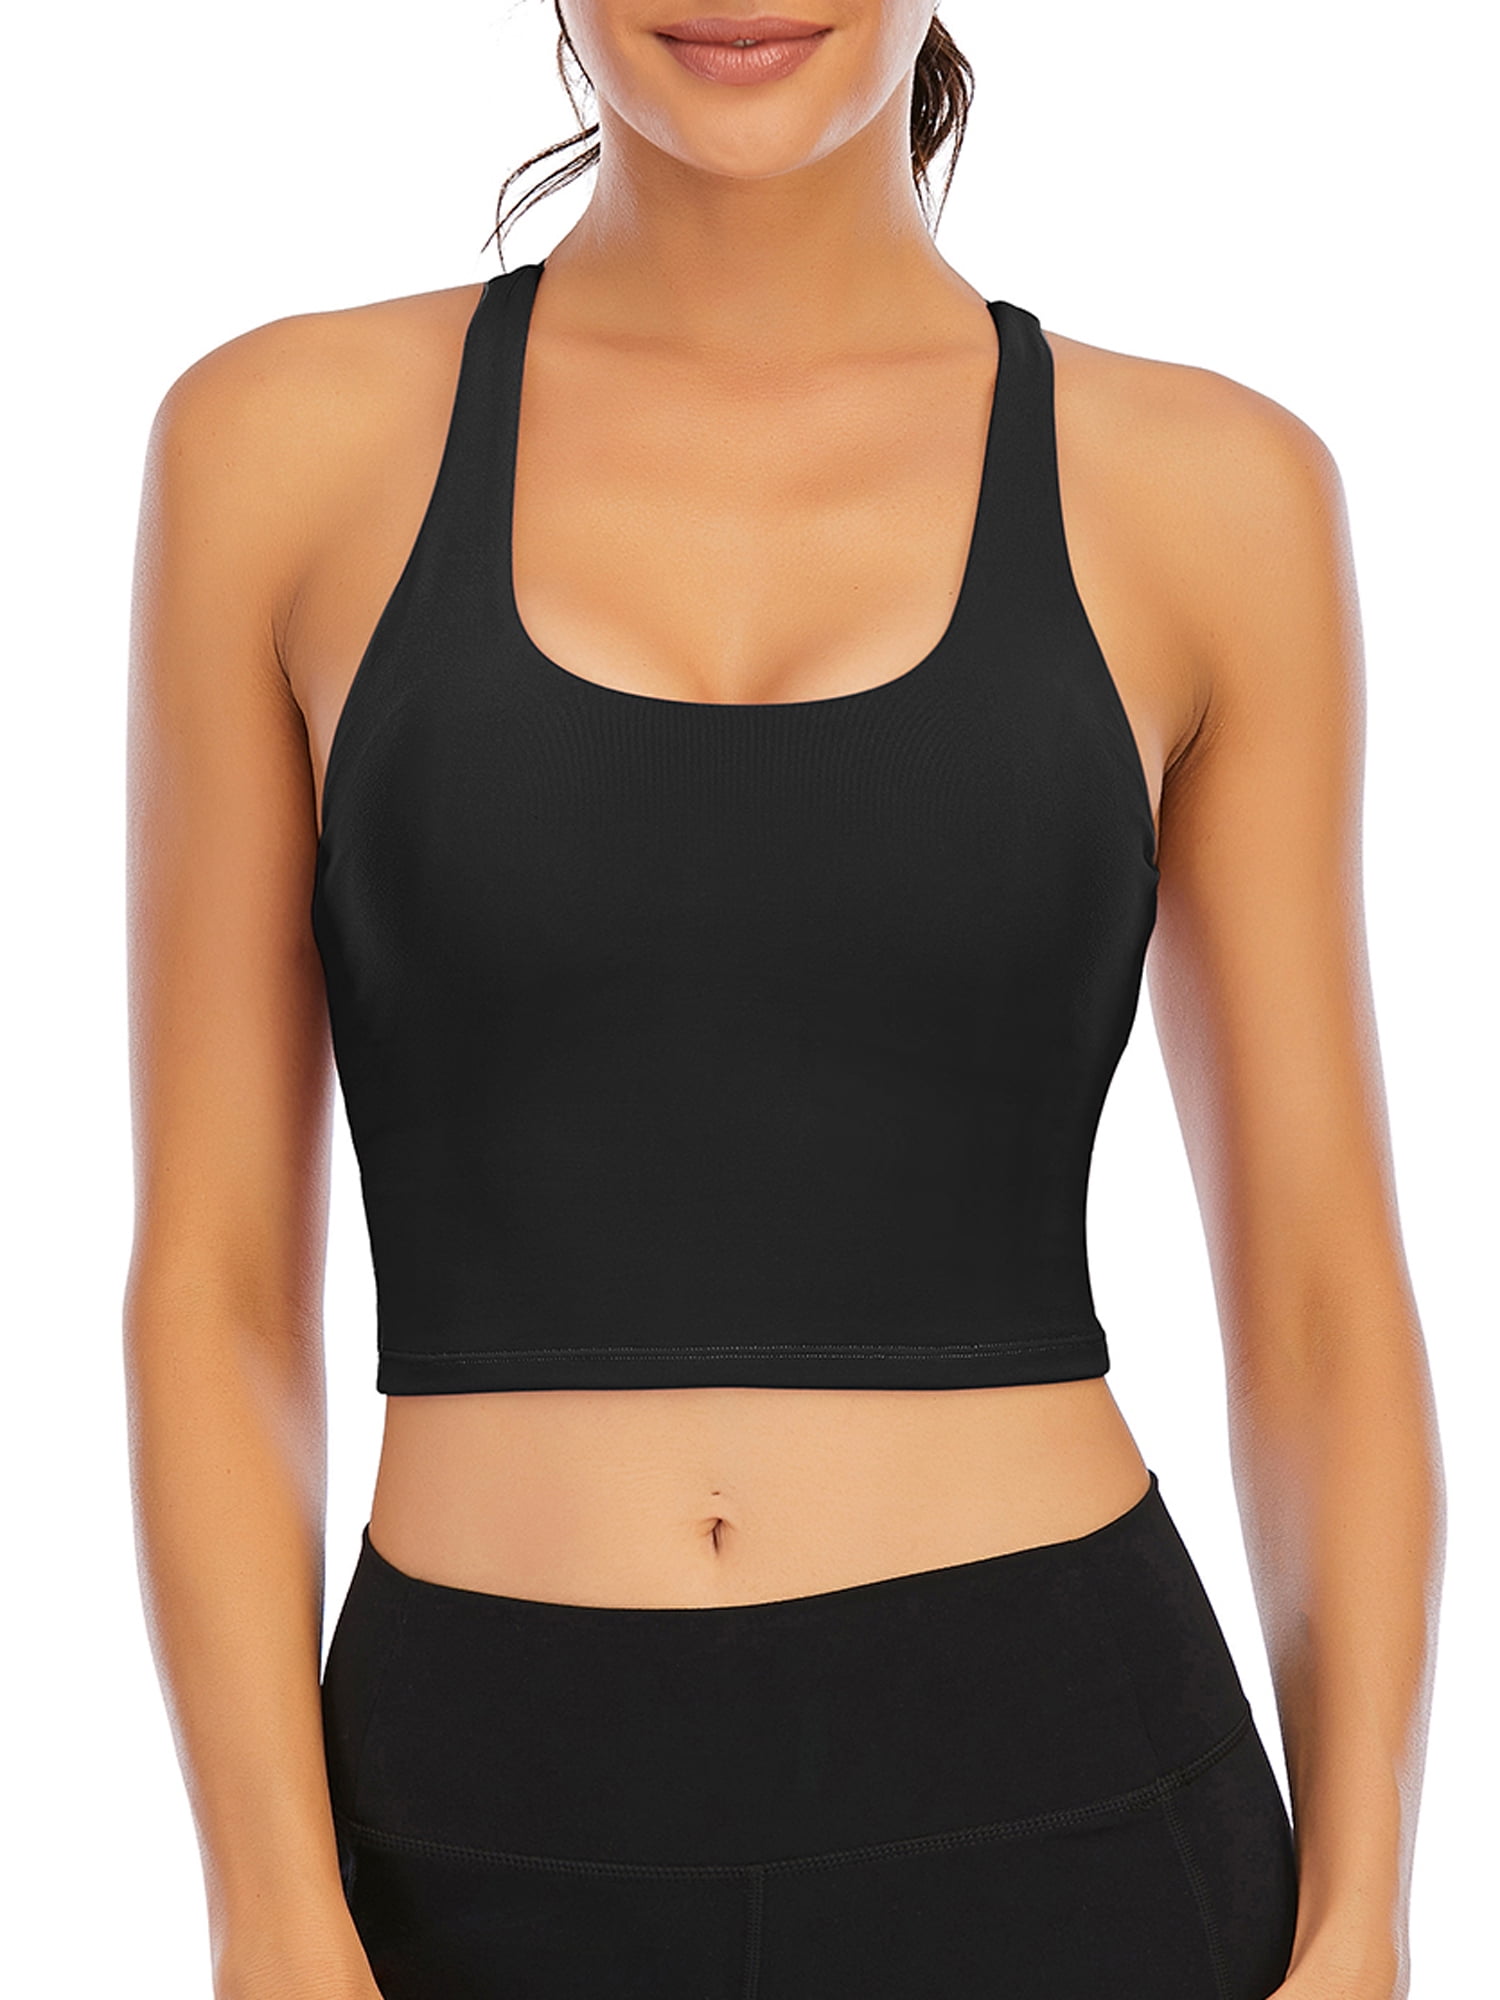 LELINTA Padded Sports Bra for Women Workout Fitness Running Crop Yoga Tank  Tops with Built in Bra Camisole Longline Shirts 